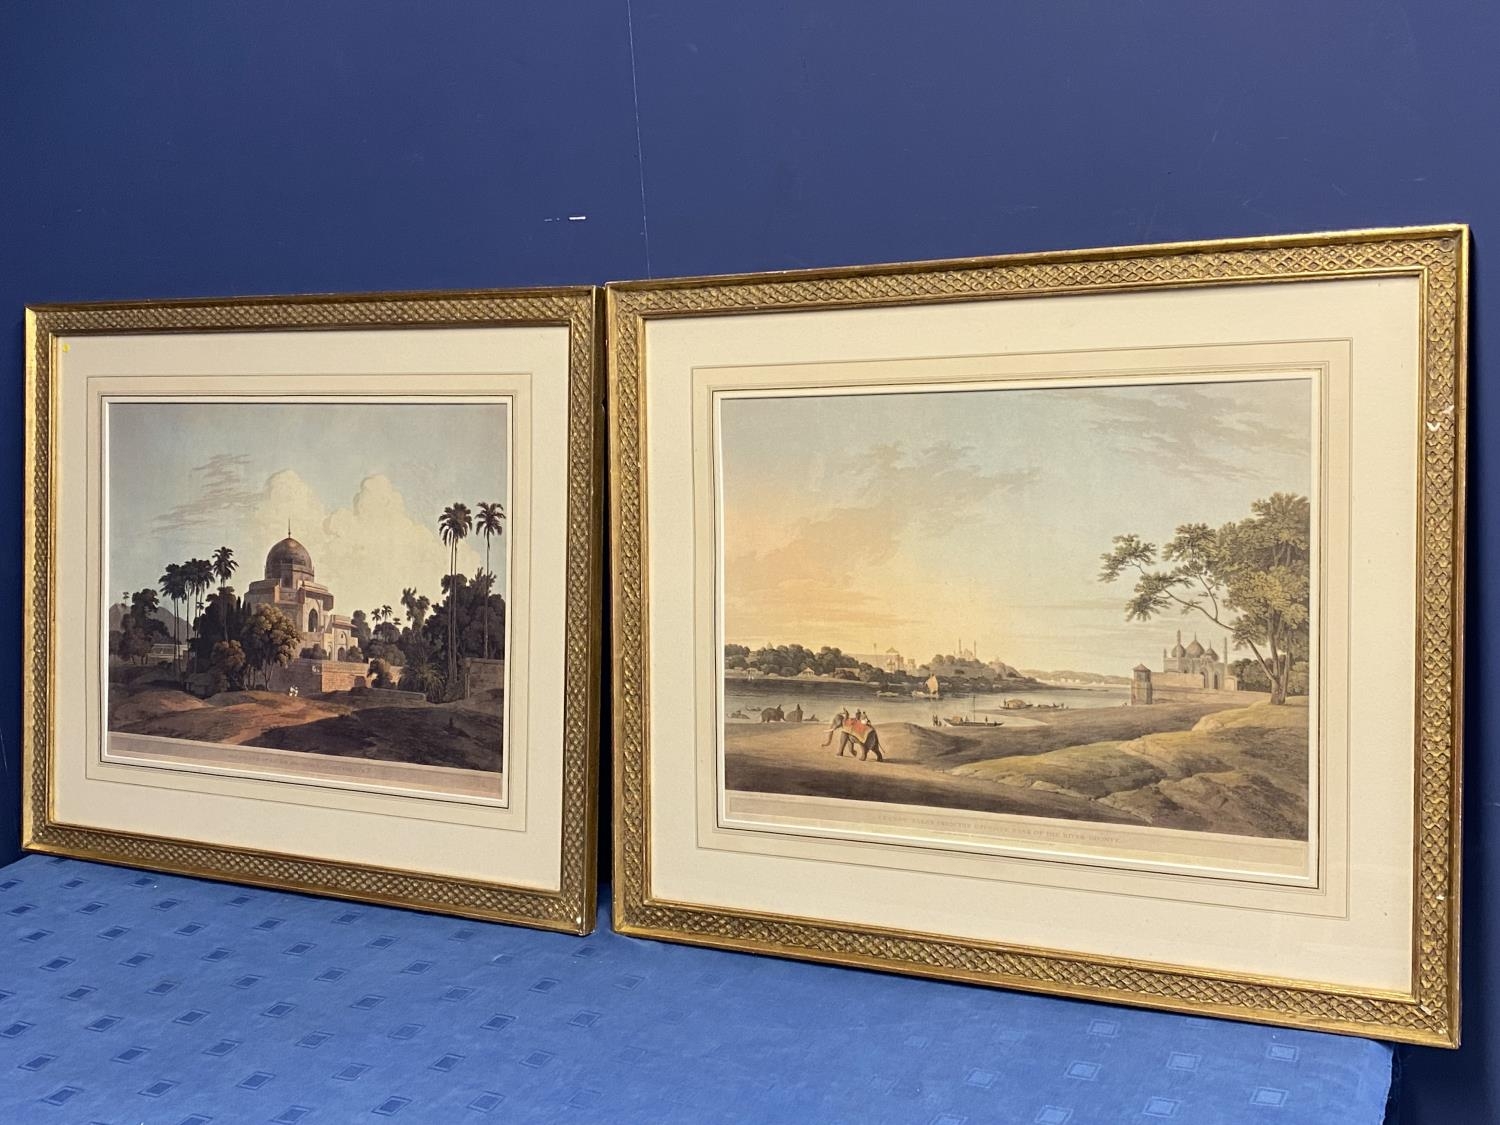 Pair of gilt glazed framed modern prints of Indian Scenes, by Thomas Daniels RA, 51 x 65cm - Image 2 of 7